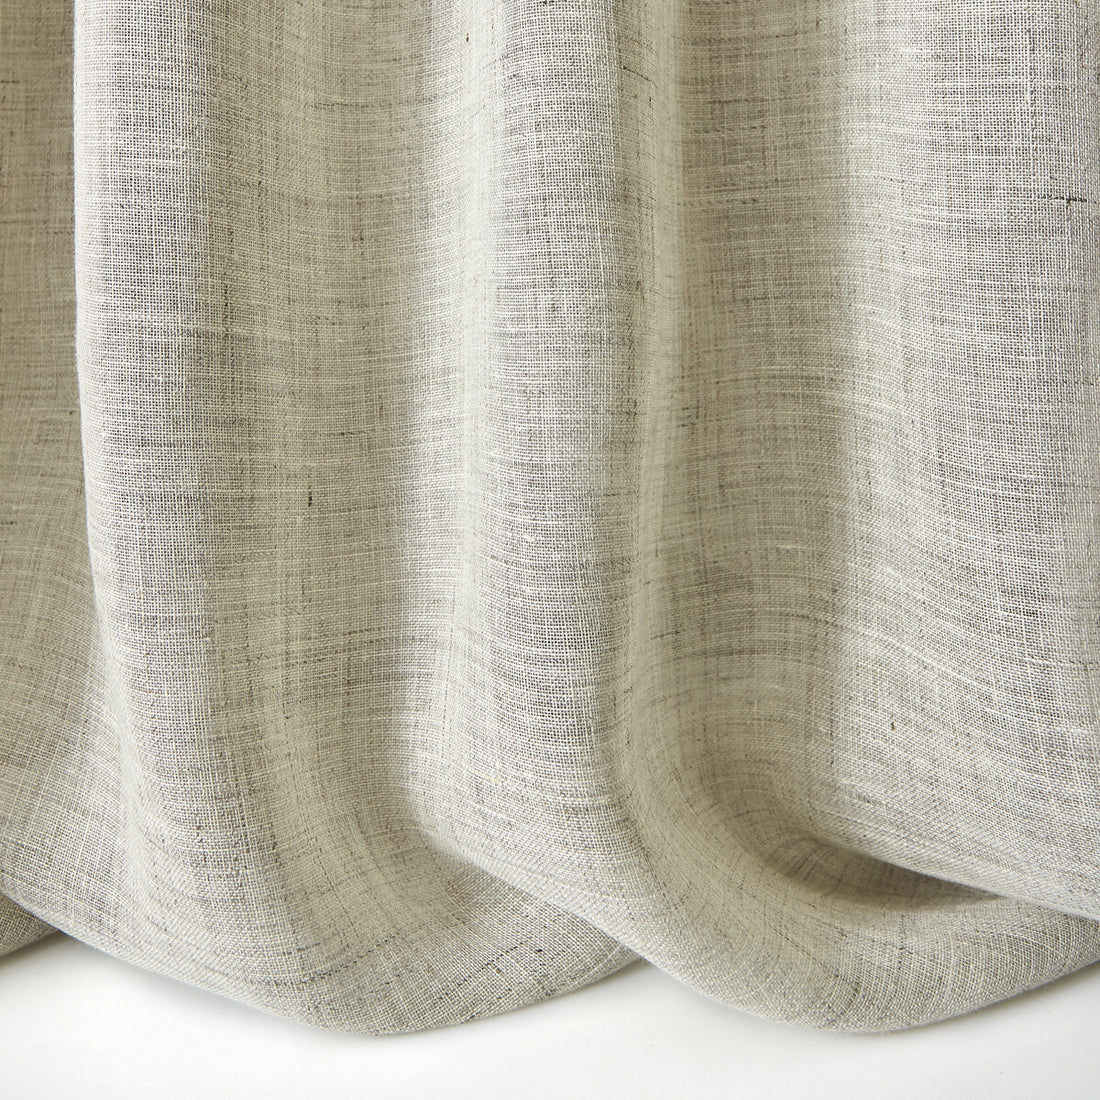 Menes fabric in 6 color - pattern LZ-30198.06.0 - by Kravet Design in the Lizzo collection